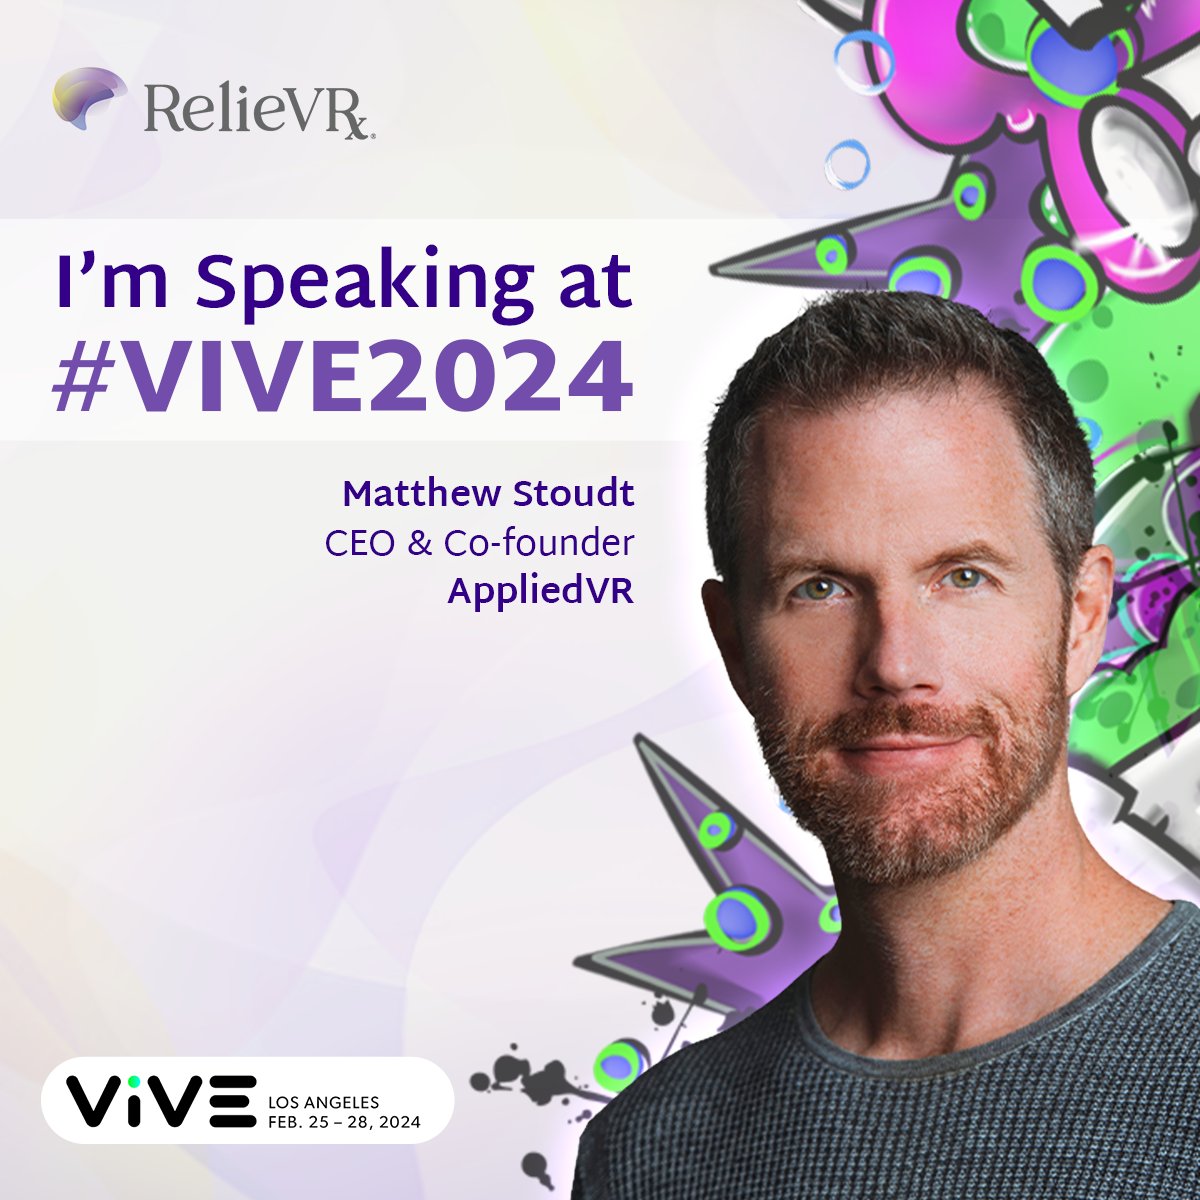 Mark your calendar, we will be attending #ViVE2024! Visit our CEO and Team at booth #1246 and experience the RelieVRx program firsthand. #VR #ImmersiveTherapeutics #Healthcare